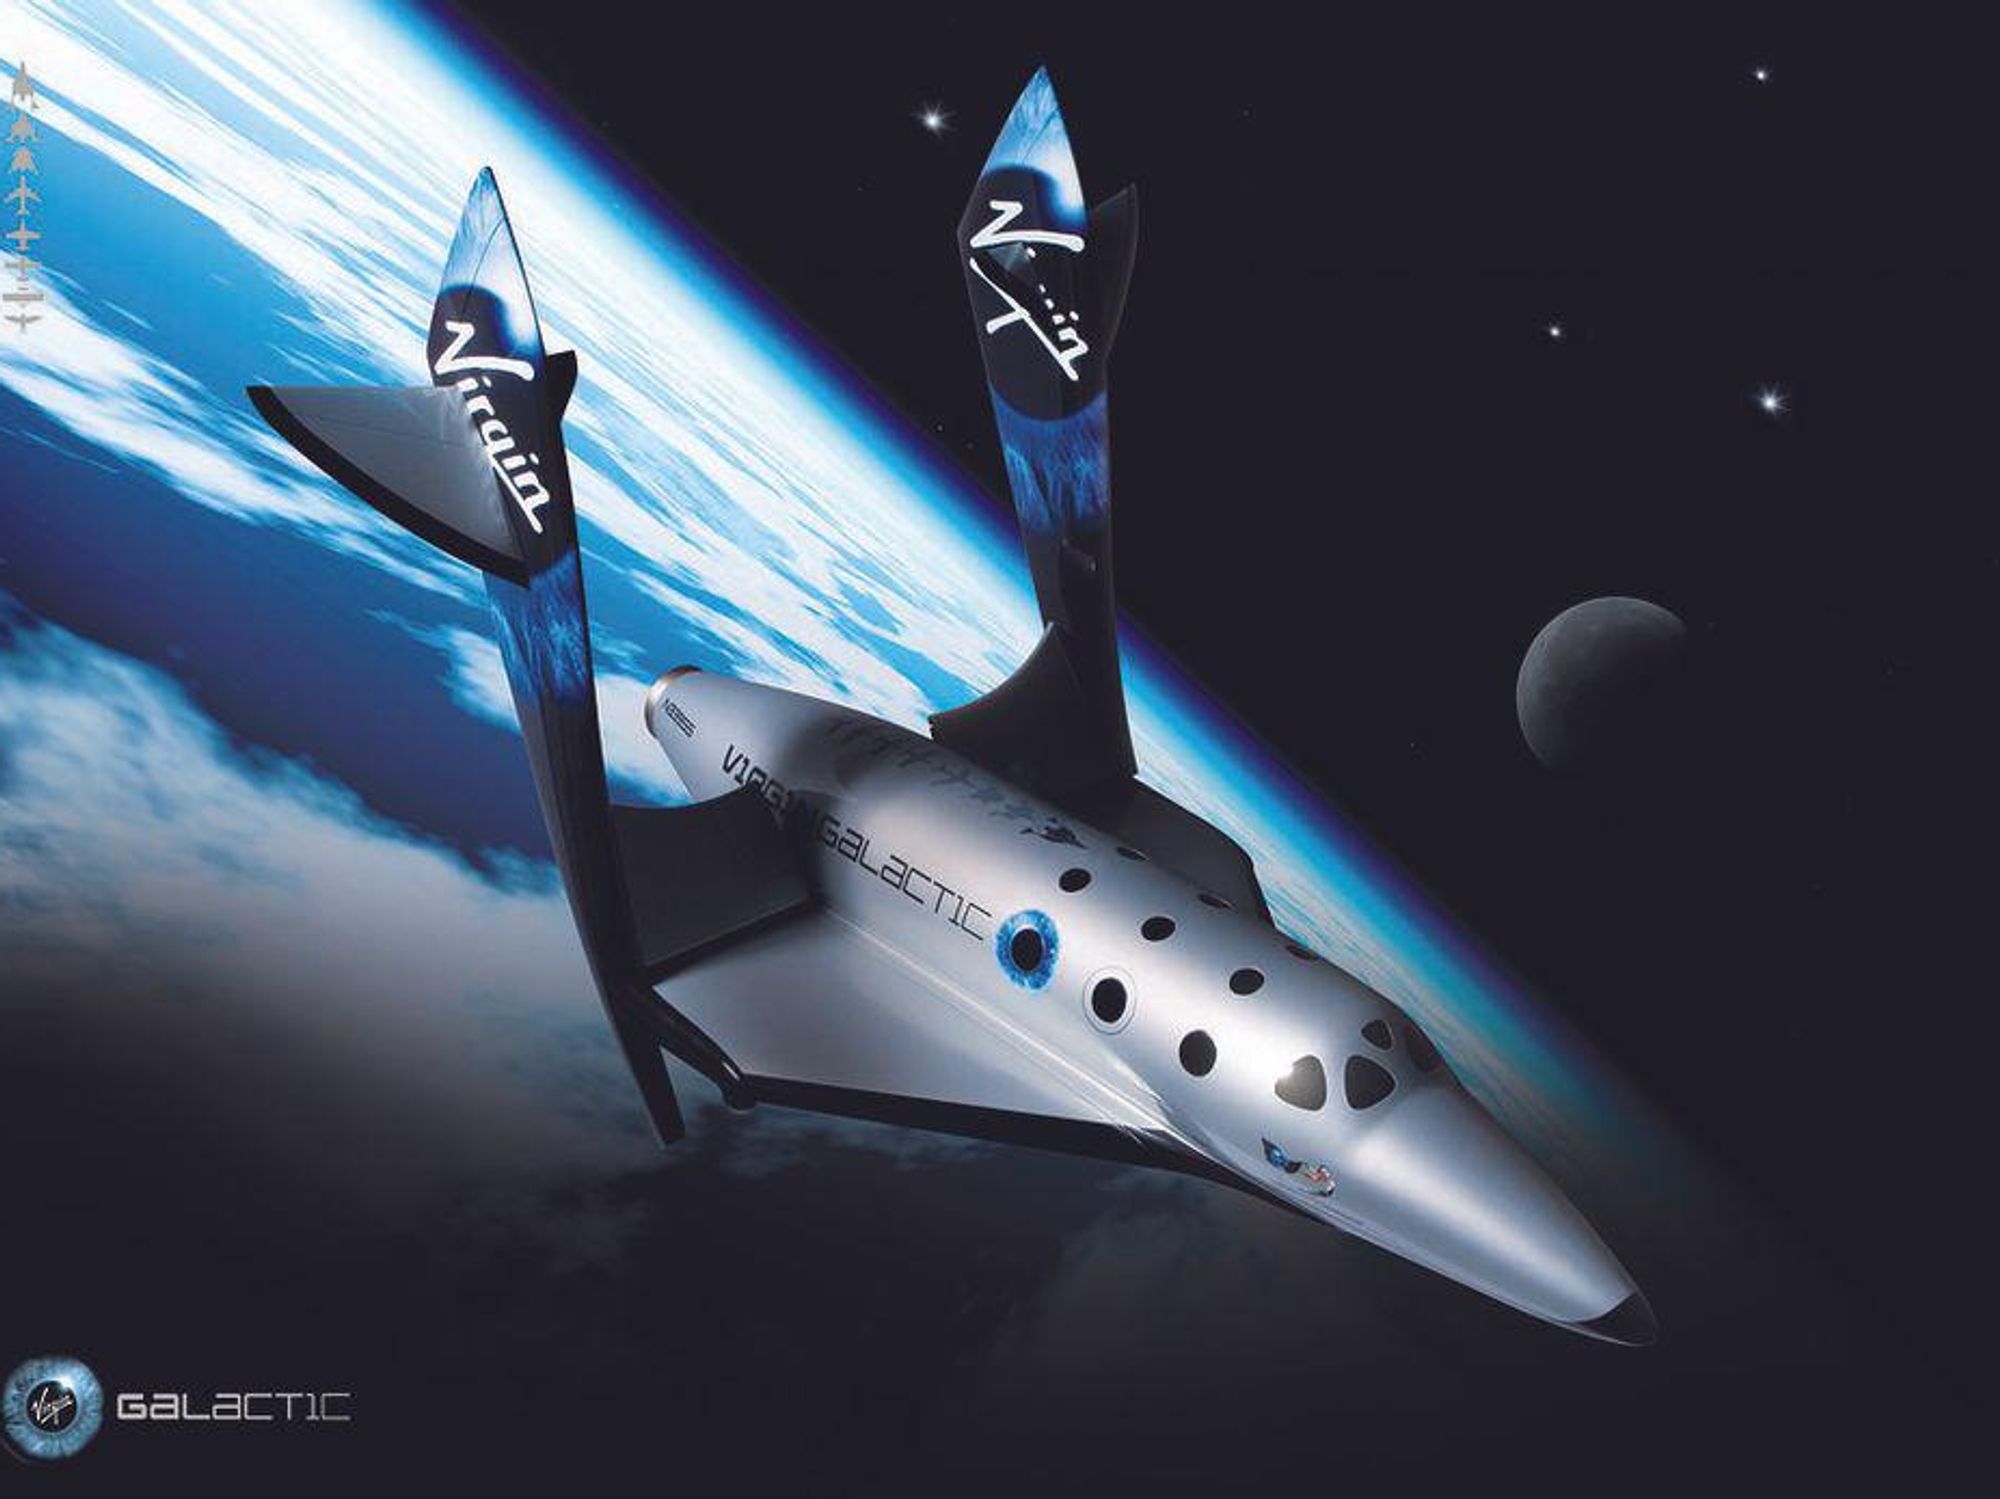 Virgin Galactic's Space Flights Grounded Amid Investigation